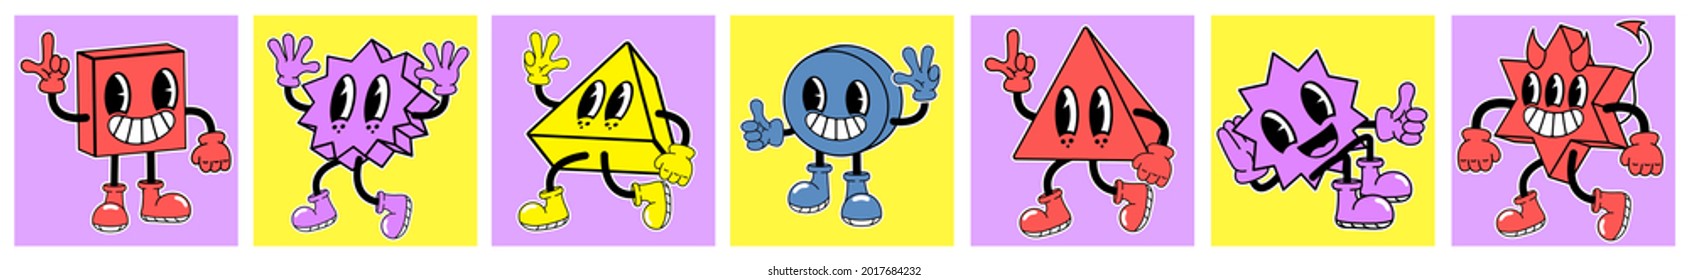 Cute abstract comic characters. Cartoon style, Geometric shapes, Set of multicolored vector illustrations, In square posters, All elements are isolated